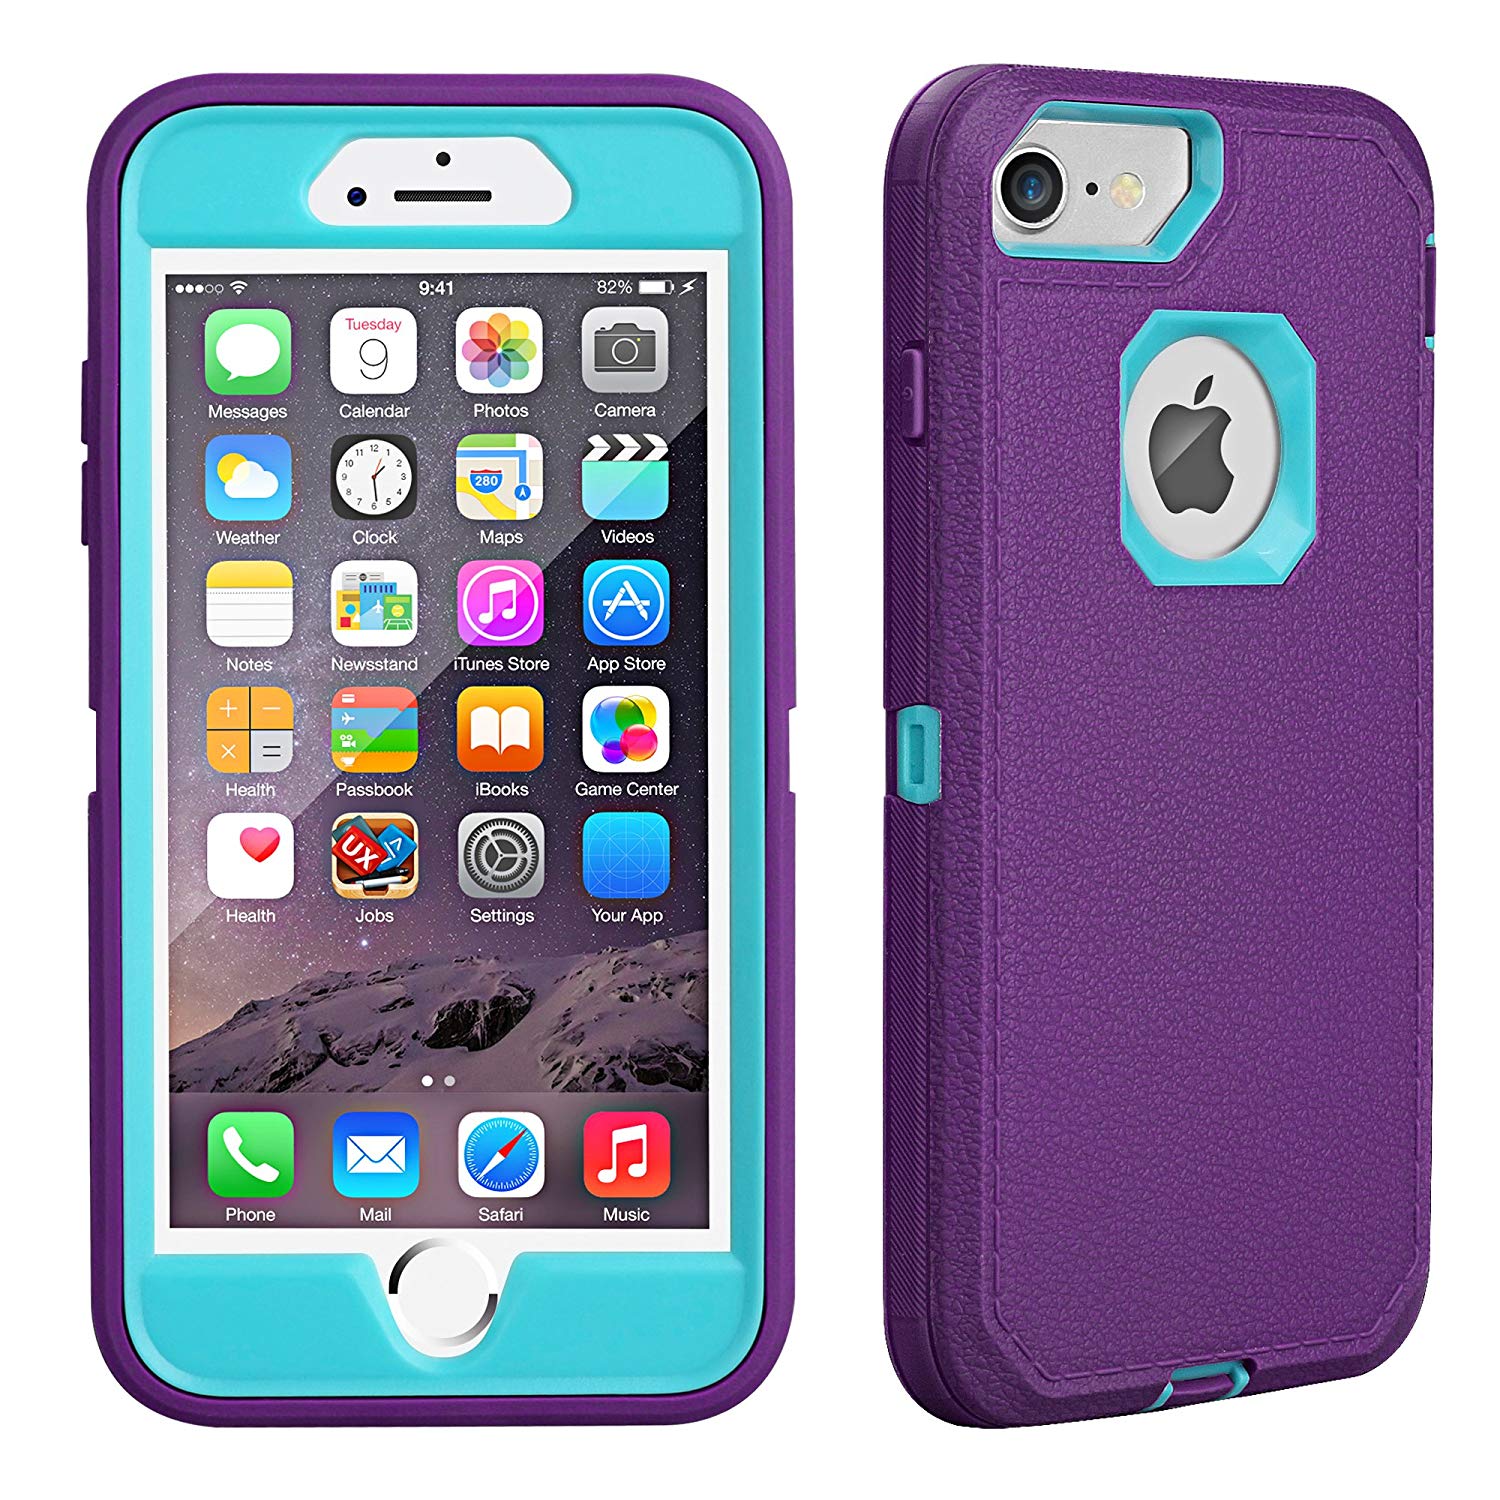 iPhone 8 case,iPhone 7 Case, iPhone 6s Case, FOGEEK [Dust-Proof] Belt-Clip Heavy Duty Kickstand Cover [Shockproof] Rugged Armor PC+TPU Shell for Apple iPhone 7 and iPhone 6/6s (purple and blue) …